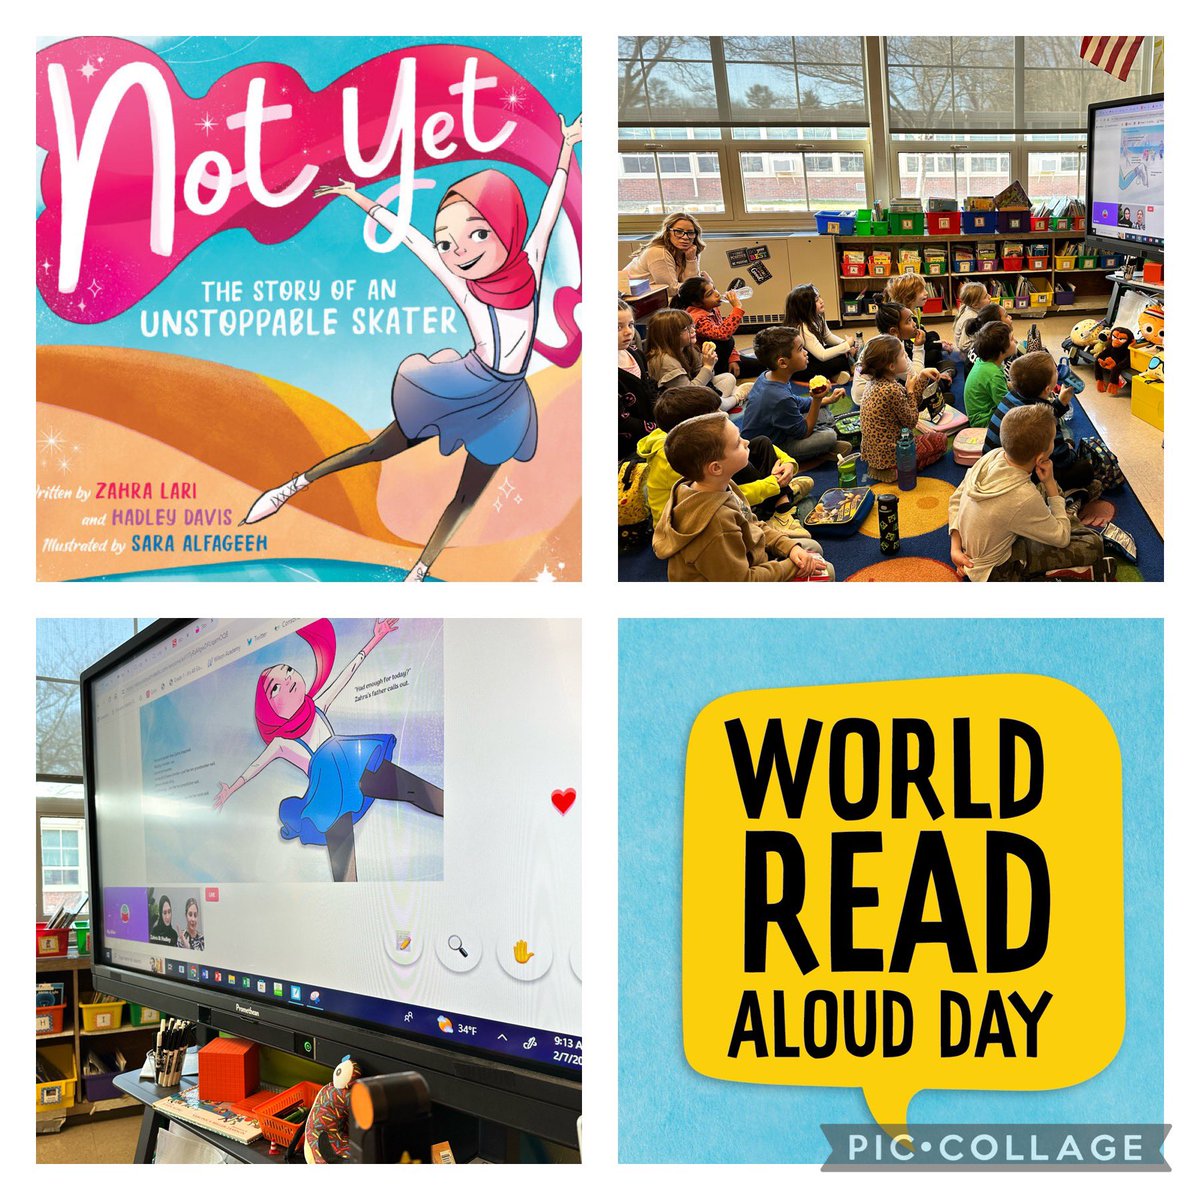 Listening to ⛸️ @zahra_lari and 🎥Hadley Davis read their new book Not Yet live from Abu Dhabi for #WorldReadAloudDay! @SaraAlfageeh we 💜 your illustrations! @ScholasticEdu @Scholastic @storyvoicelive #thepowerofYET